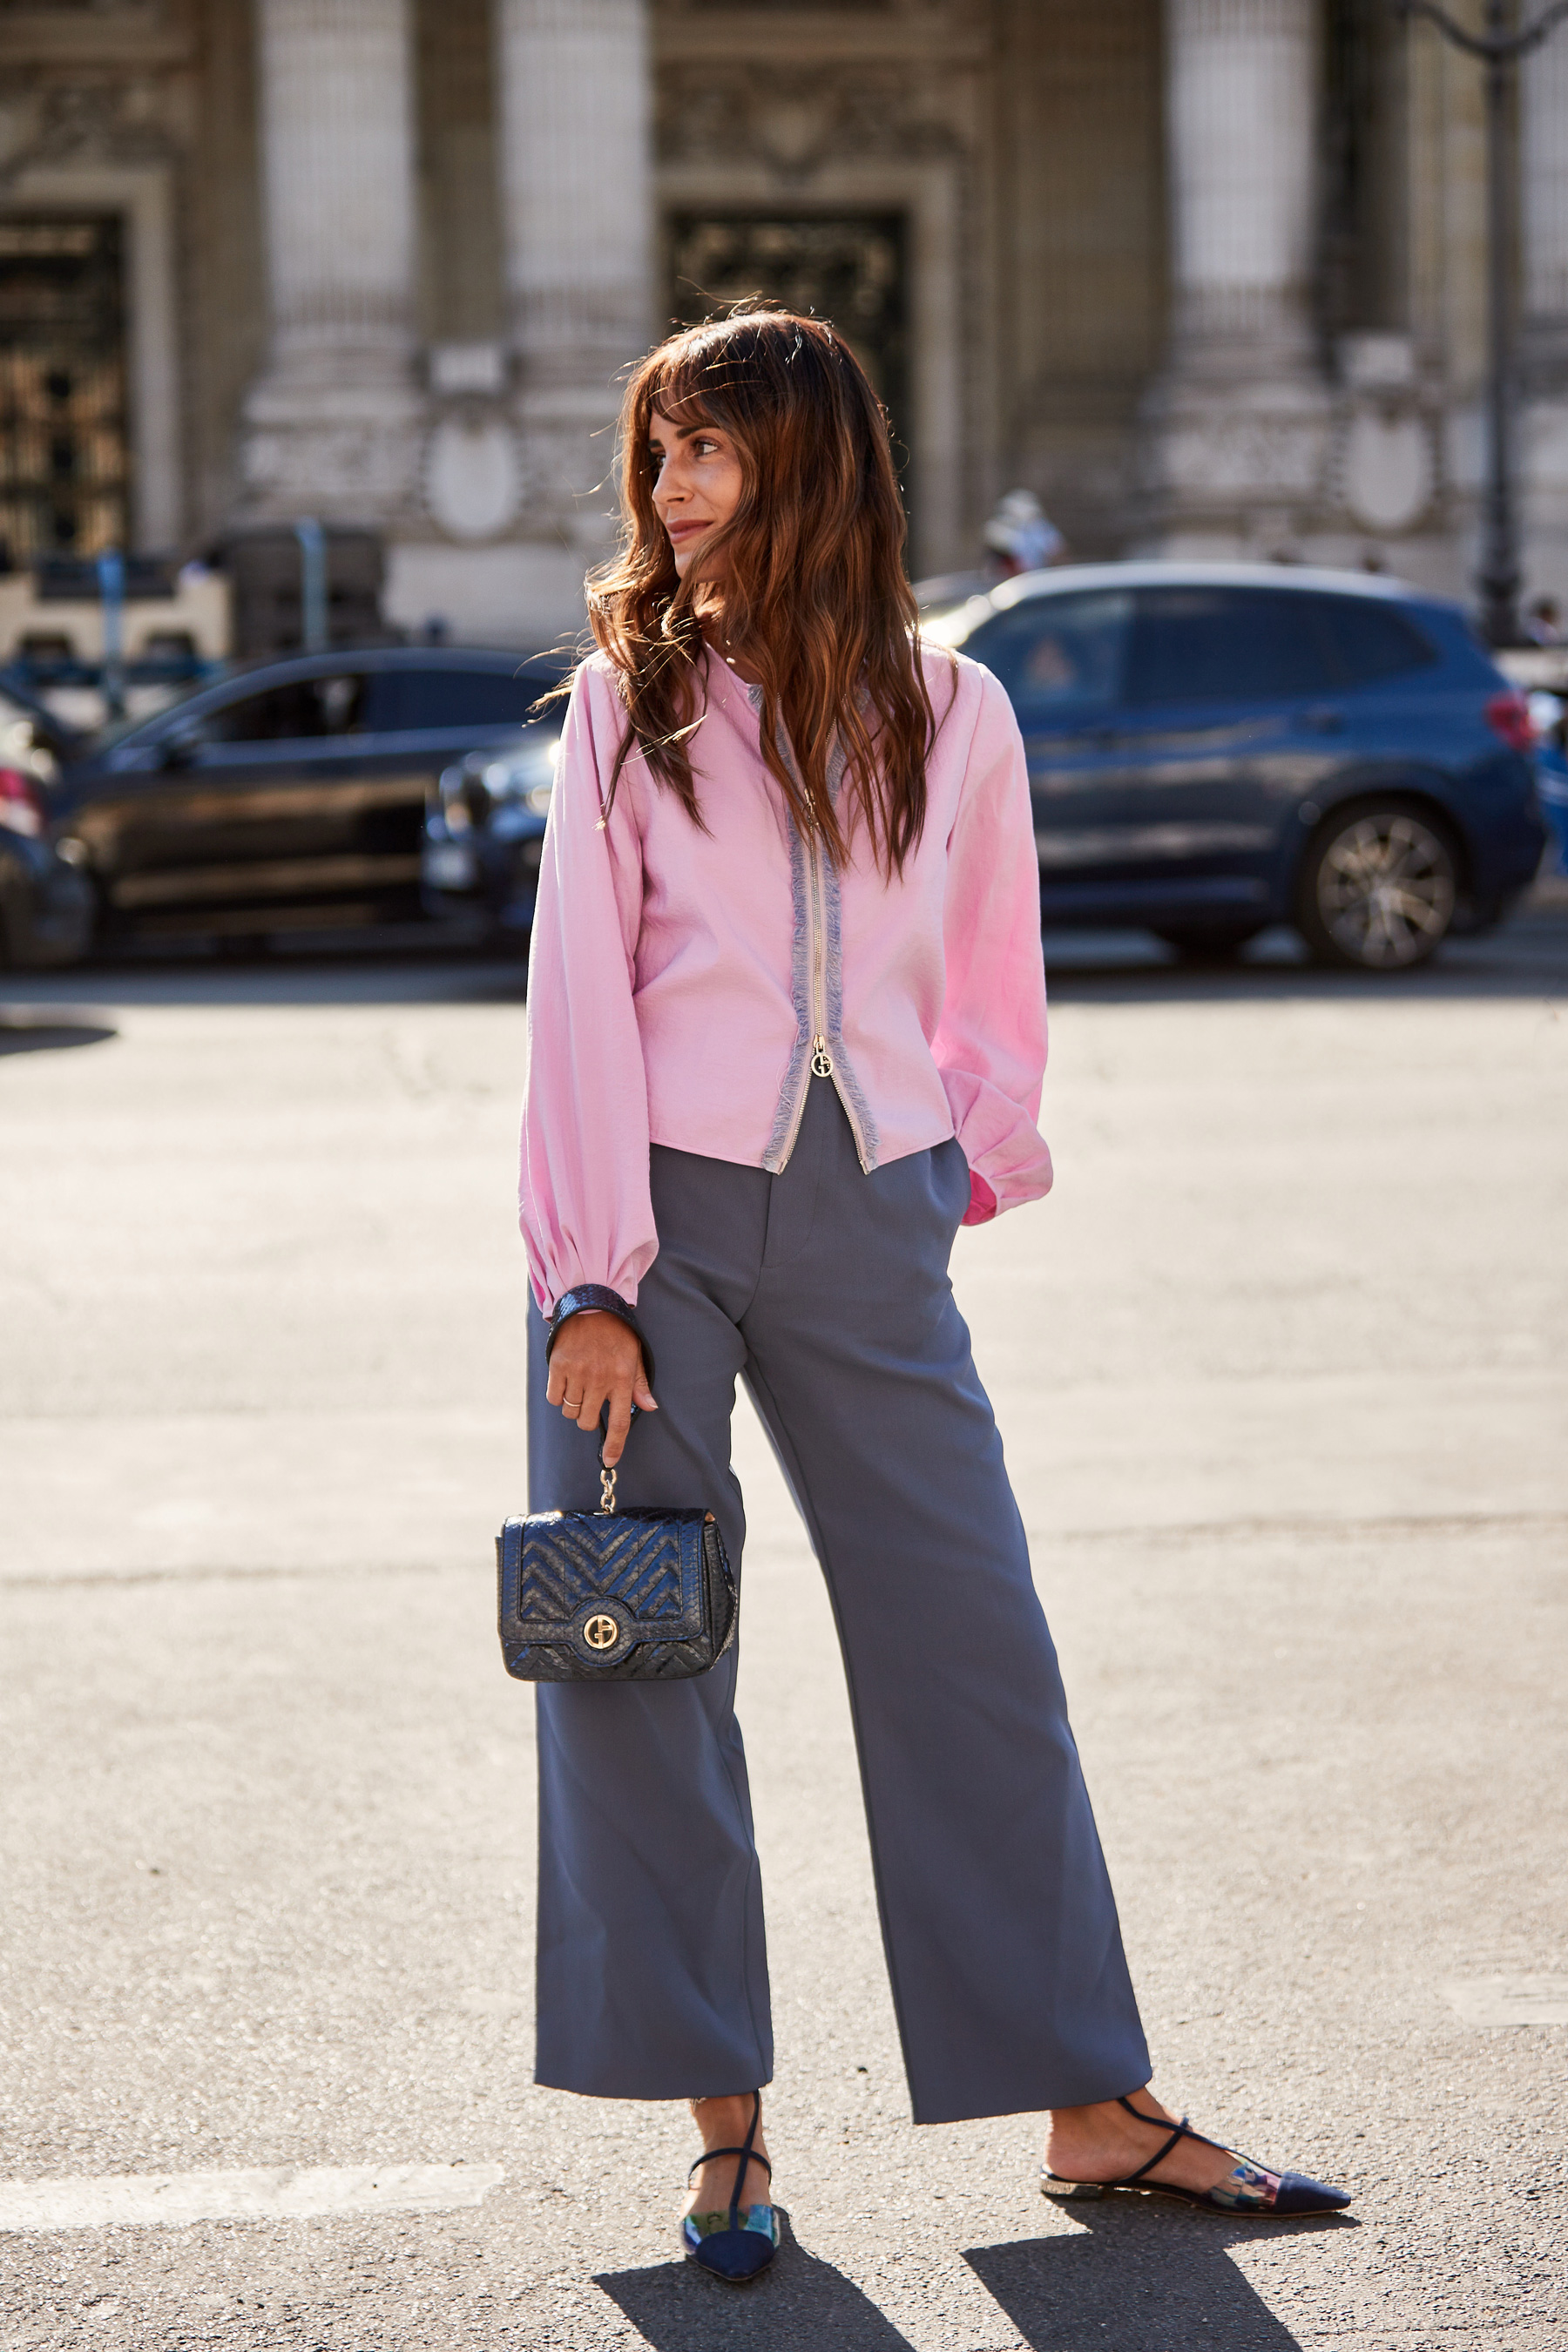 Paris Couture Street Style More From DAY 3 | The Impression